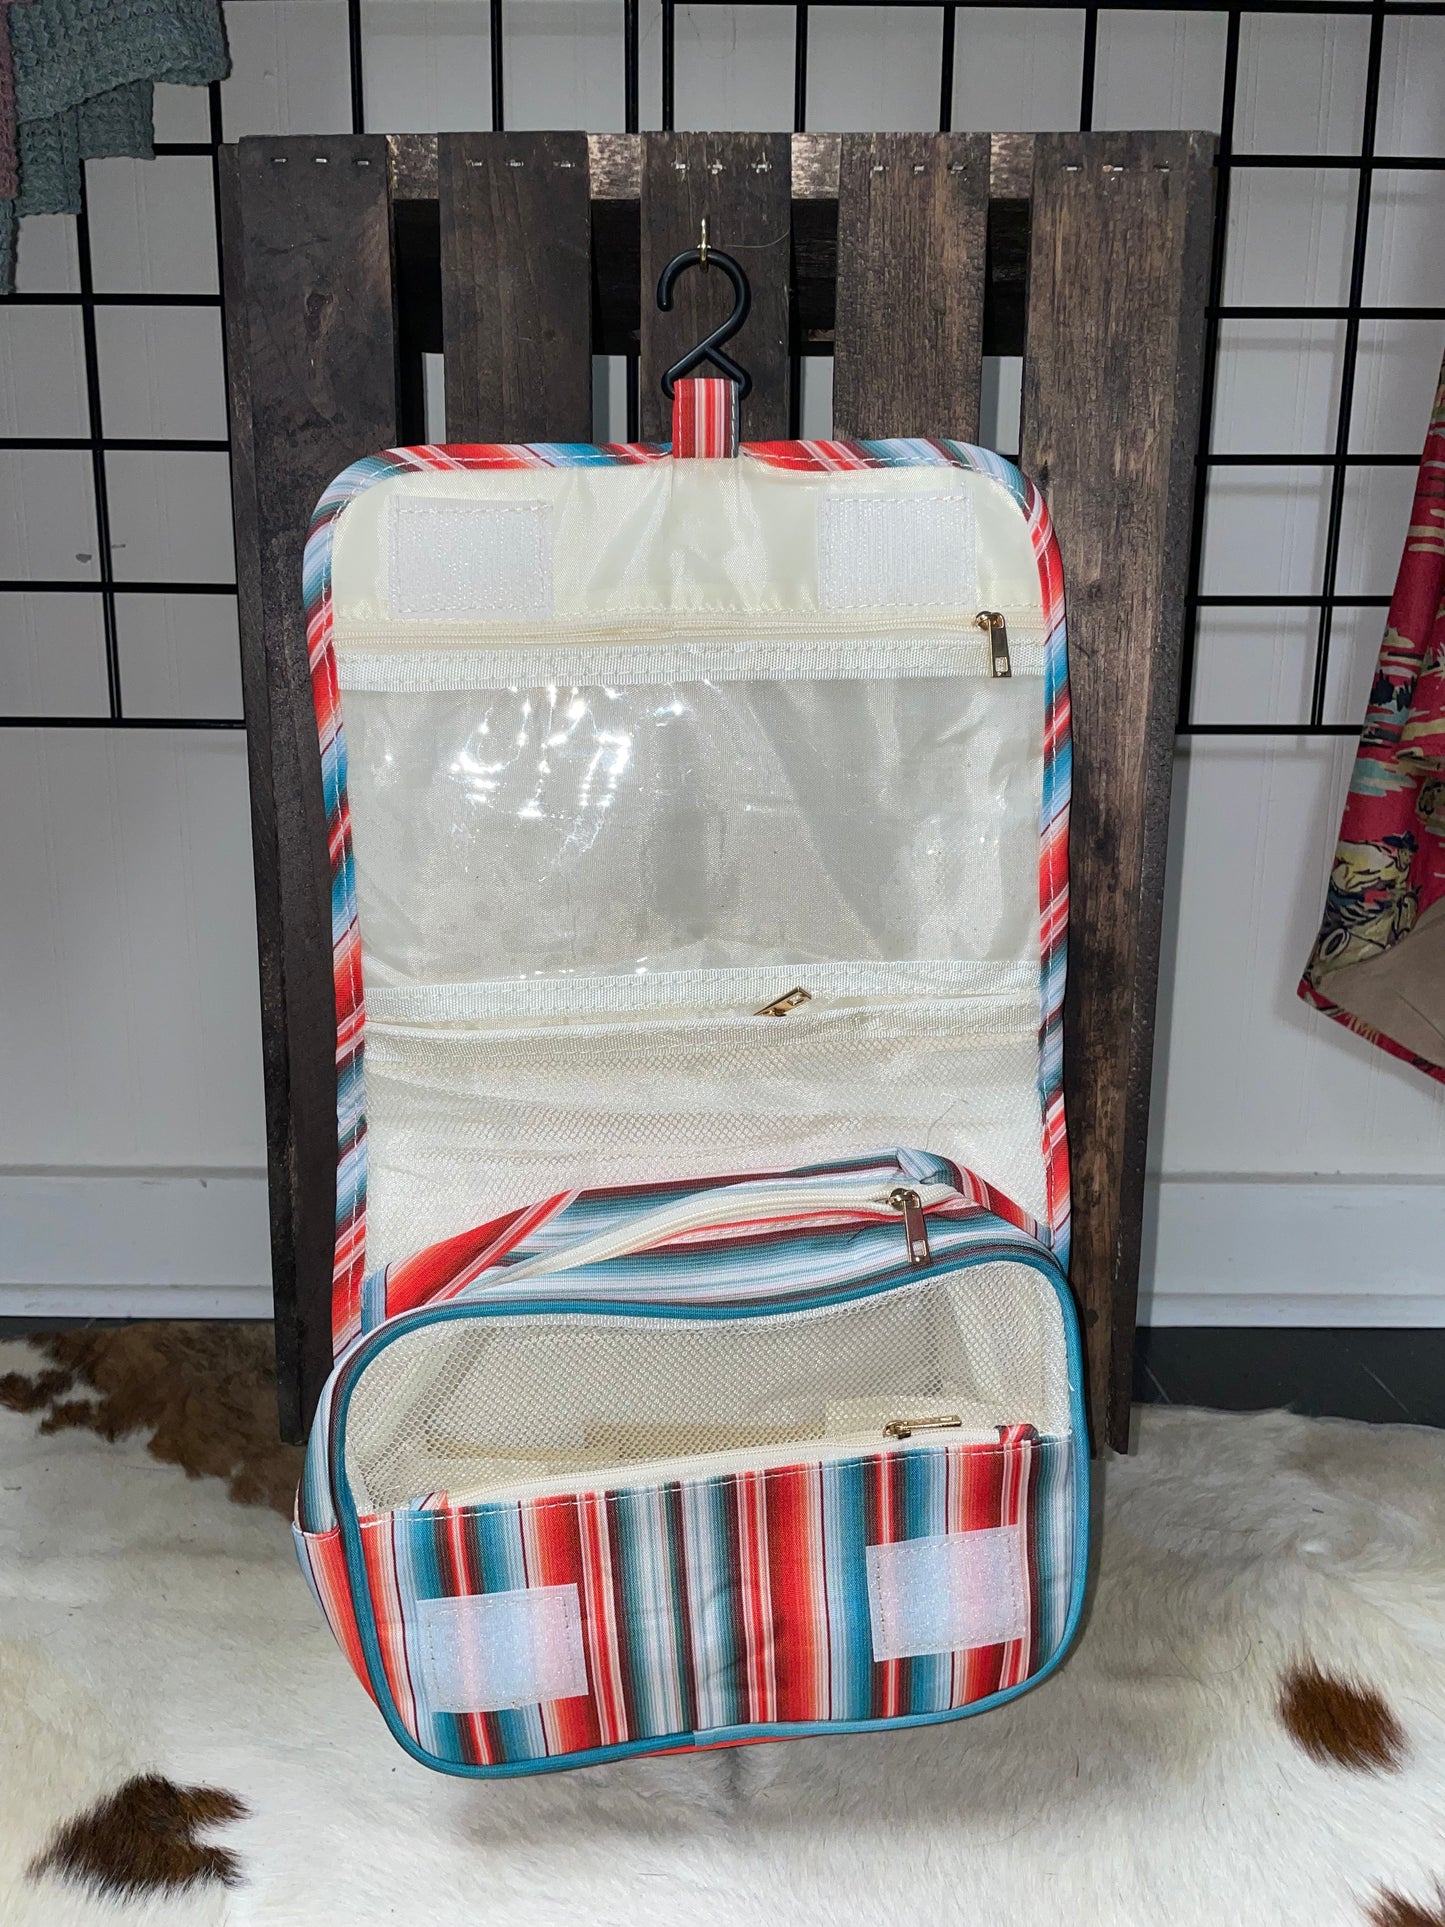 Travel Toiletry Bags